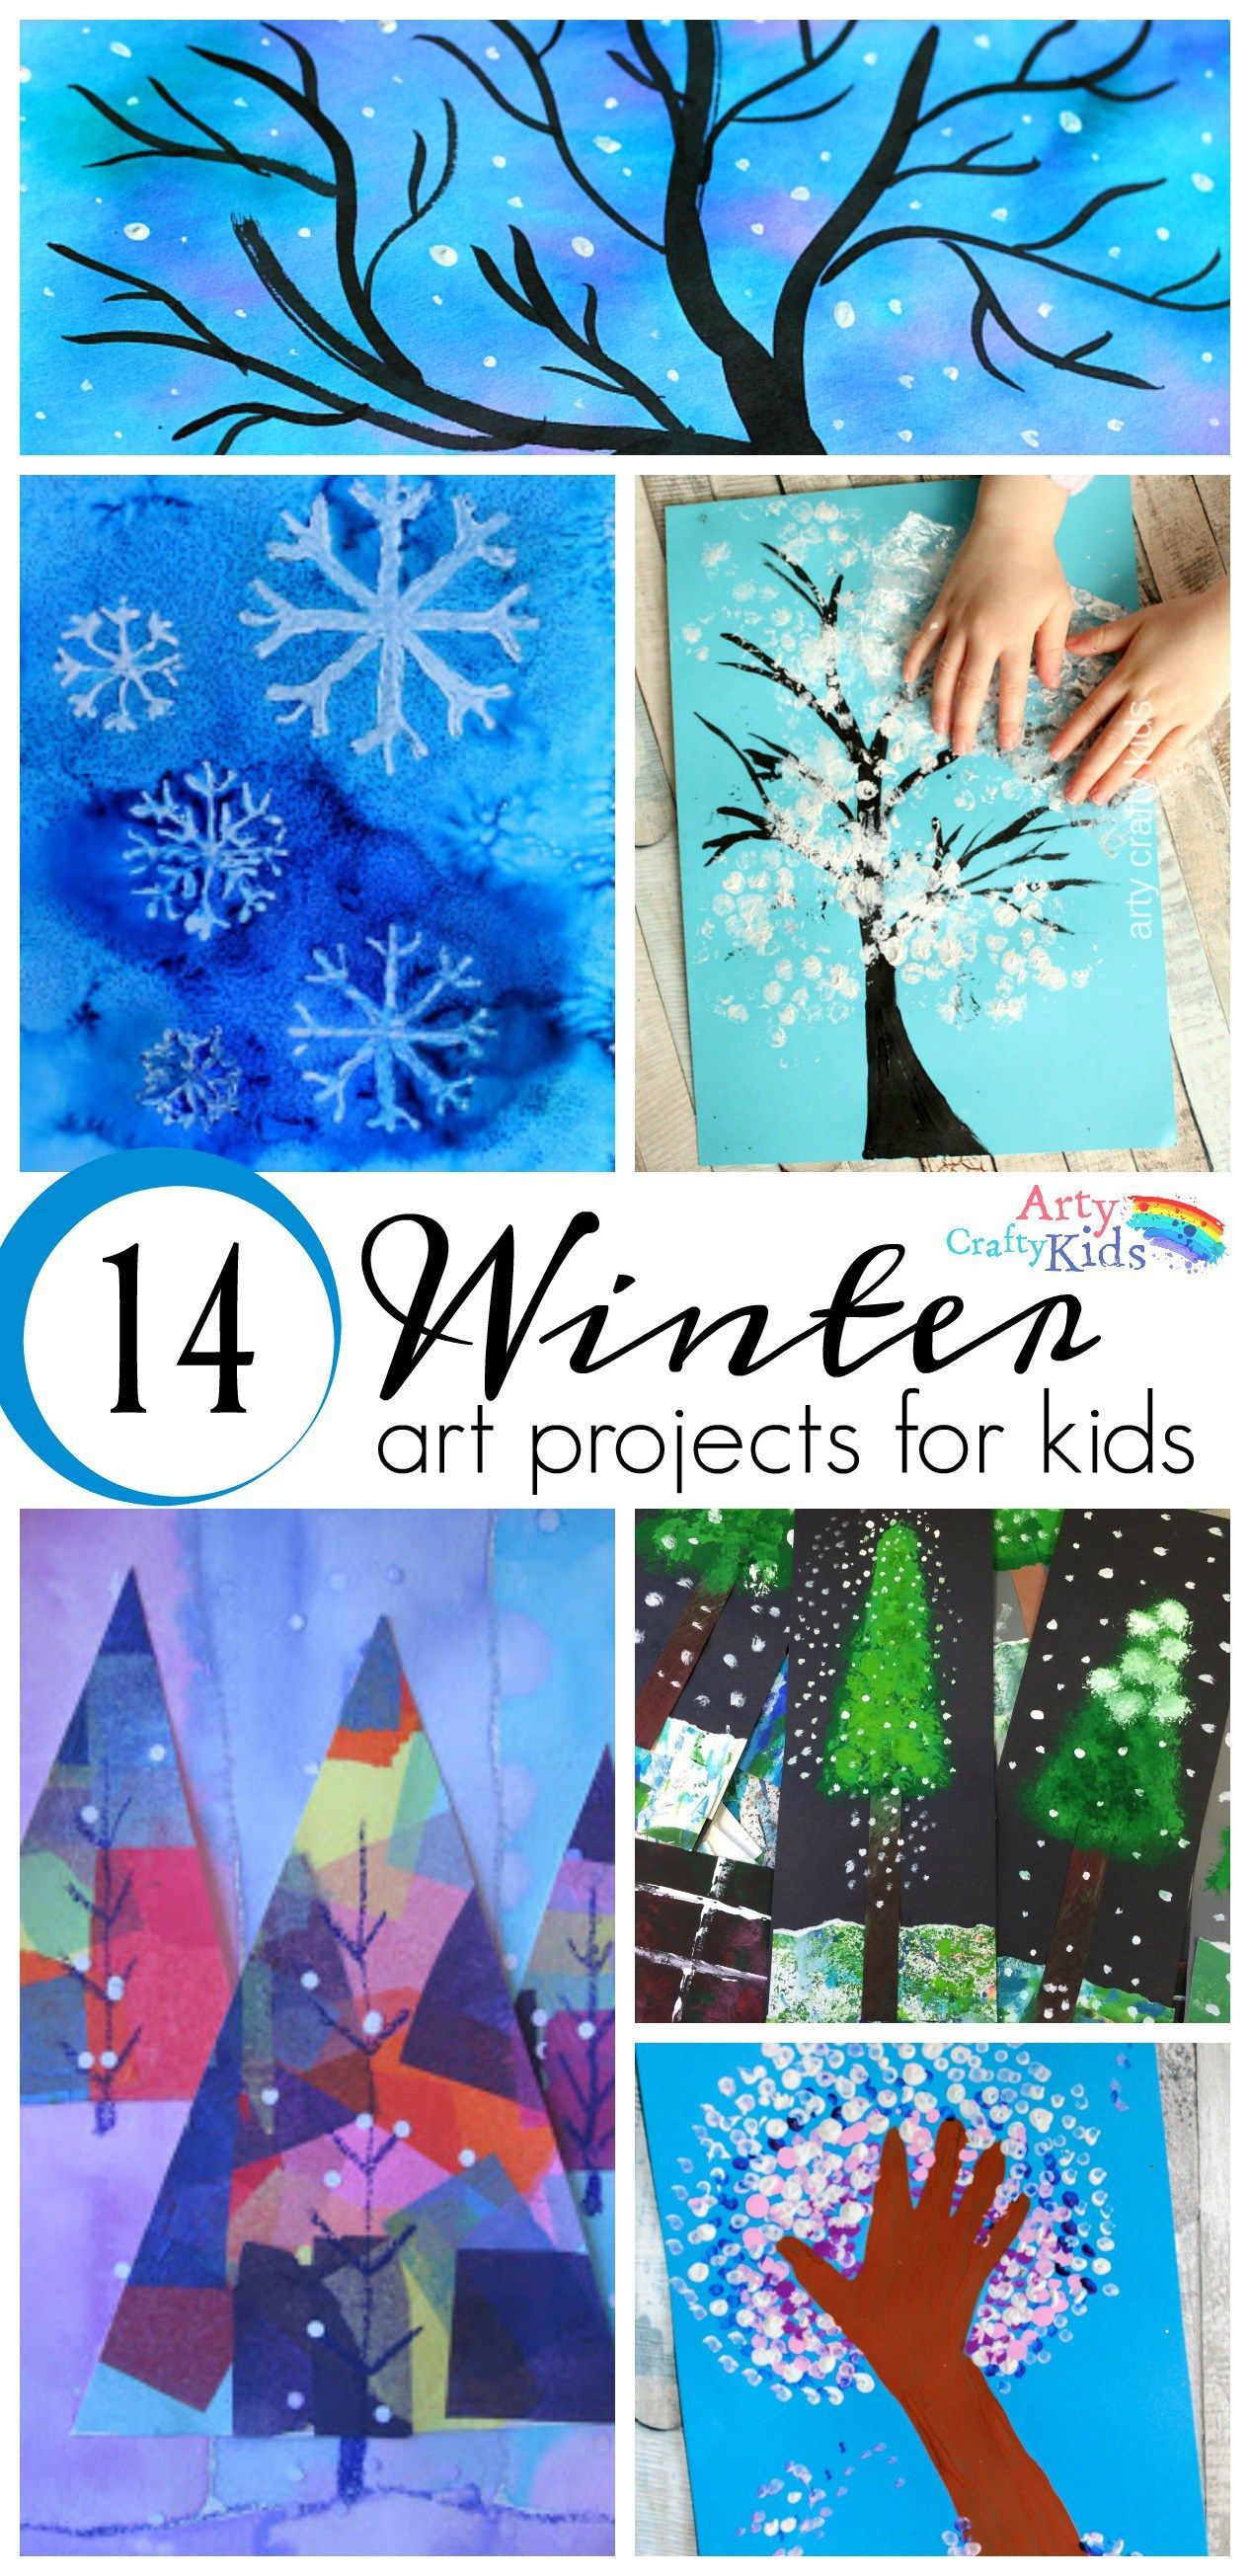 16 Winter Art Projects for Kids – A selection of gorgous snowy Winter art projects